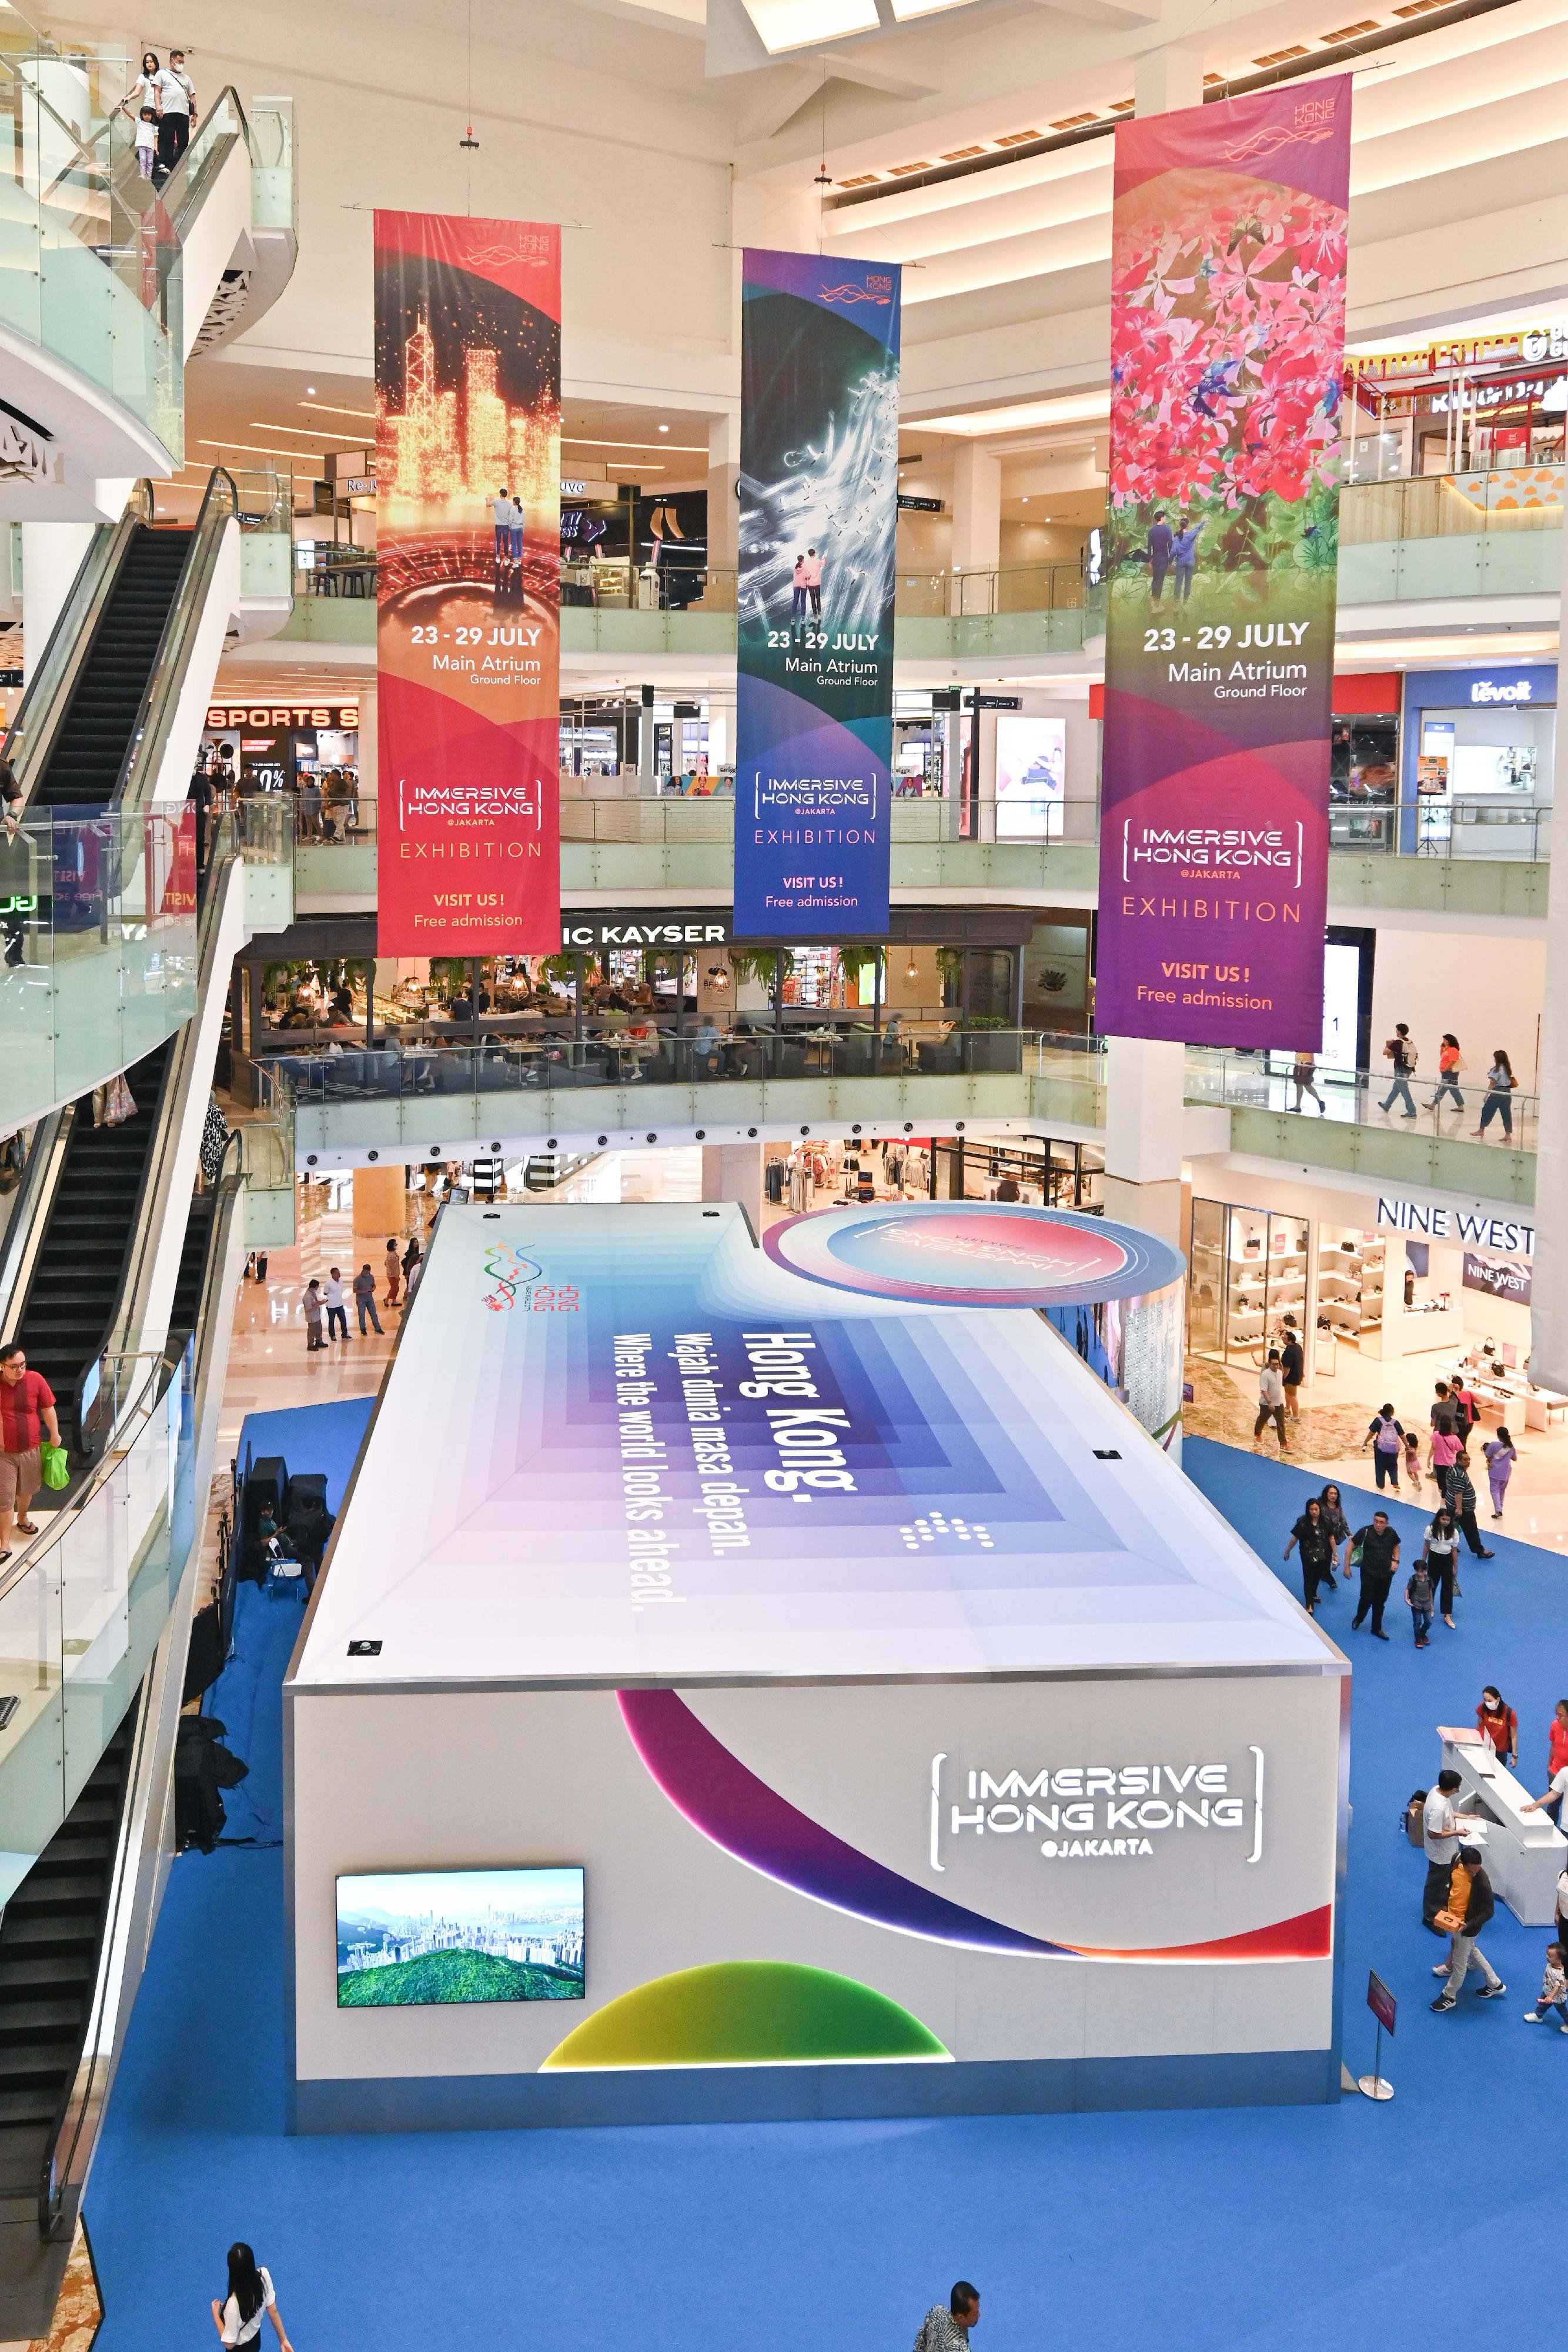 The "Immersive Hong Kong" roving exhibition, which showcases Hong Kong's unique strengths, advantages and opportunities with art technology, was launched in Jakarta, Indonesia, today (July 23) as part of a promotional campaign in Association of Southeast Asian Nations. The exhibition will run at Gandaria City Mall, a major shopping centre in Jakarta, until July 29.